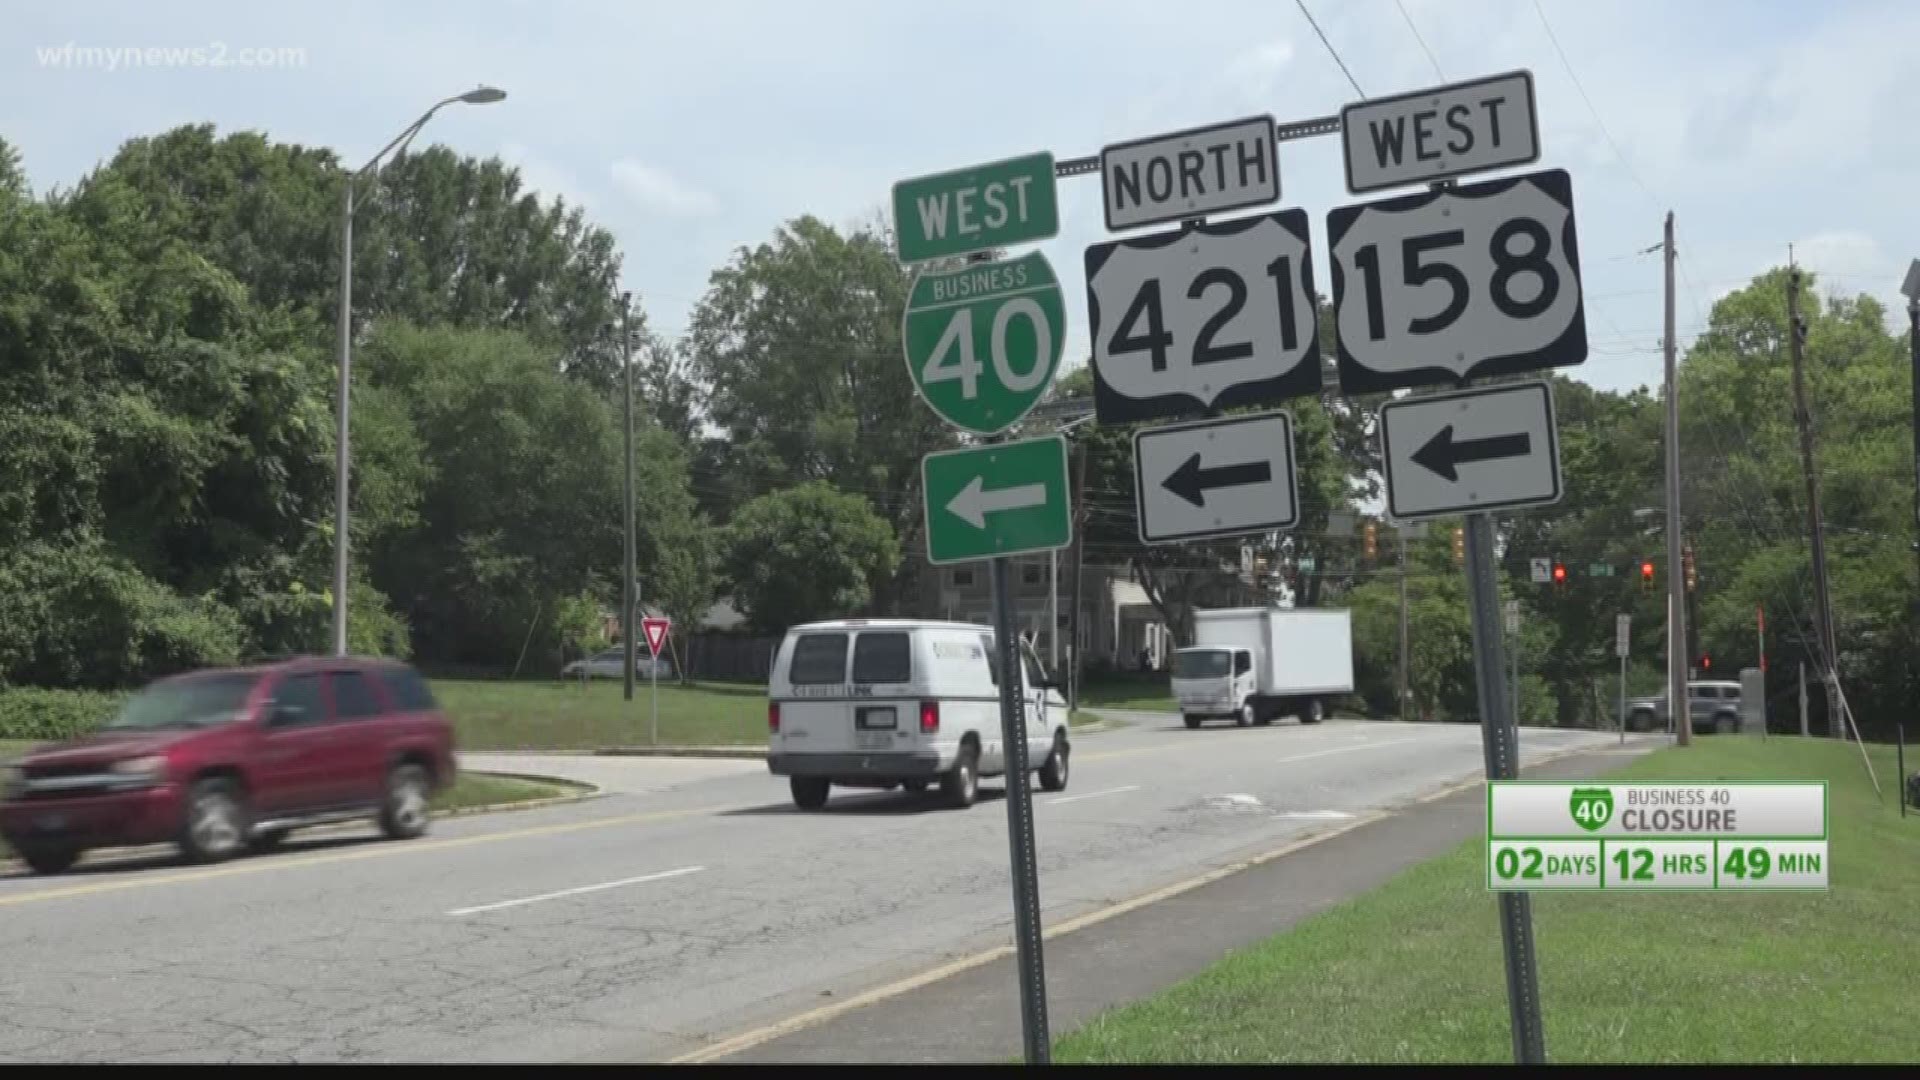 Leaders in Winston-Salem and Forsyth County are working together to make the business 40 closure easier for commuters